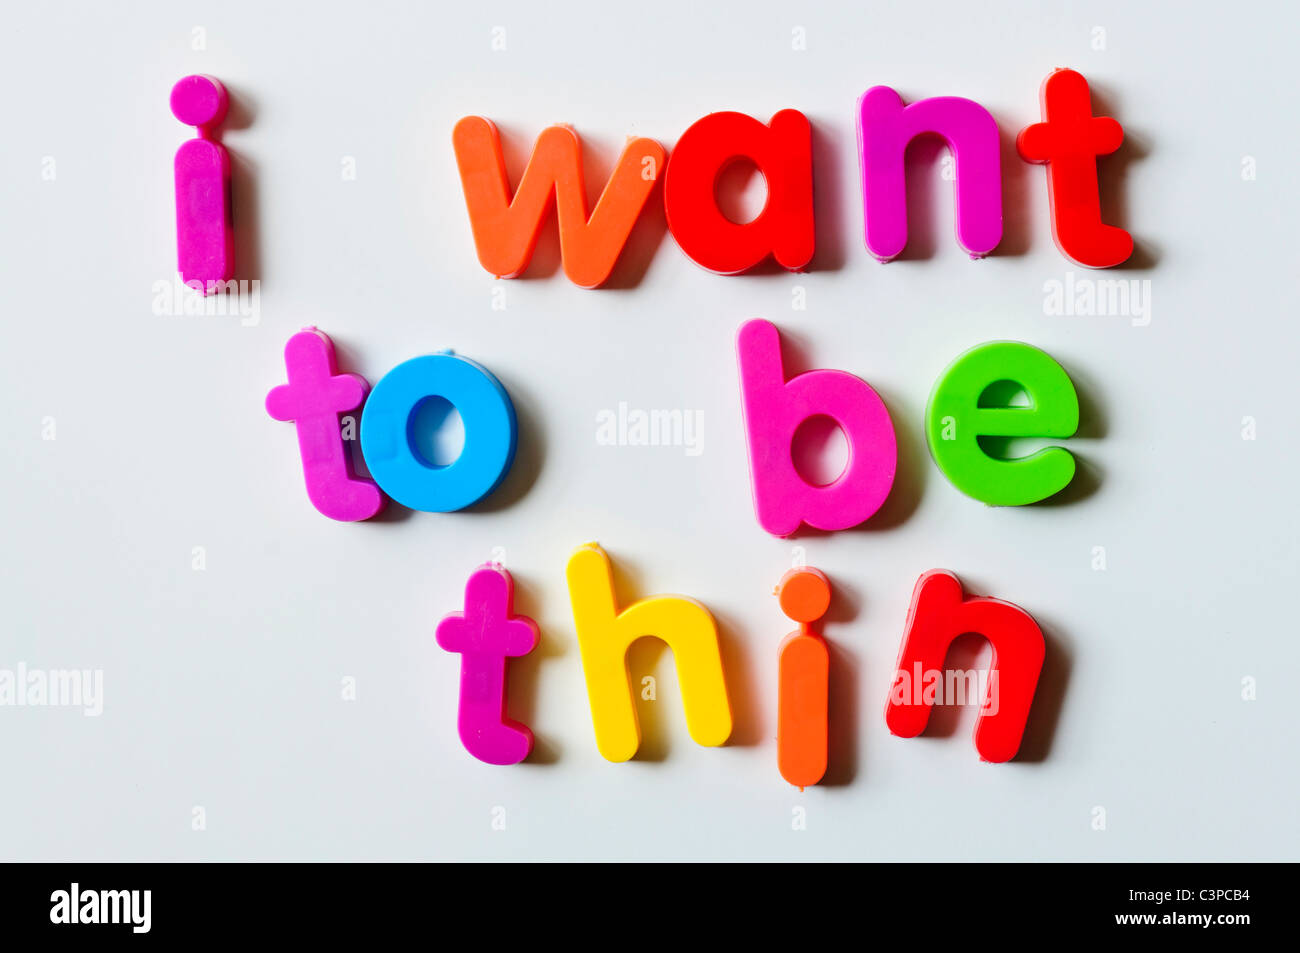 Fridge magnets magnetic letters spelling out 'I want to be thin' Stock Photo